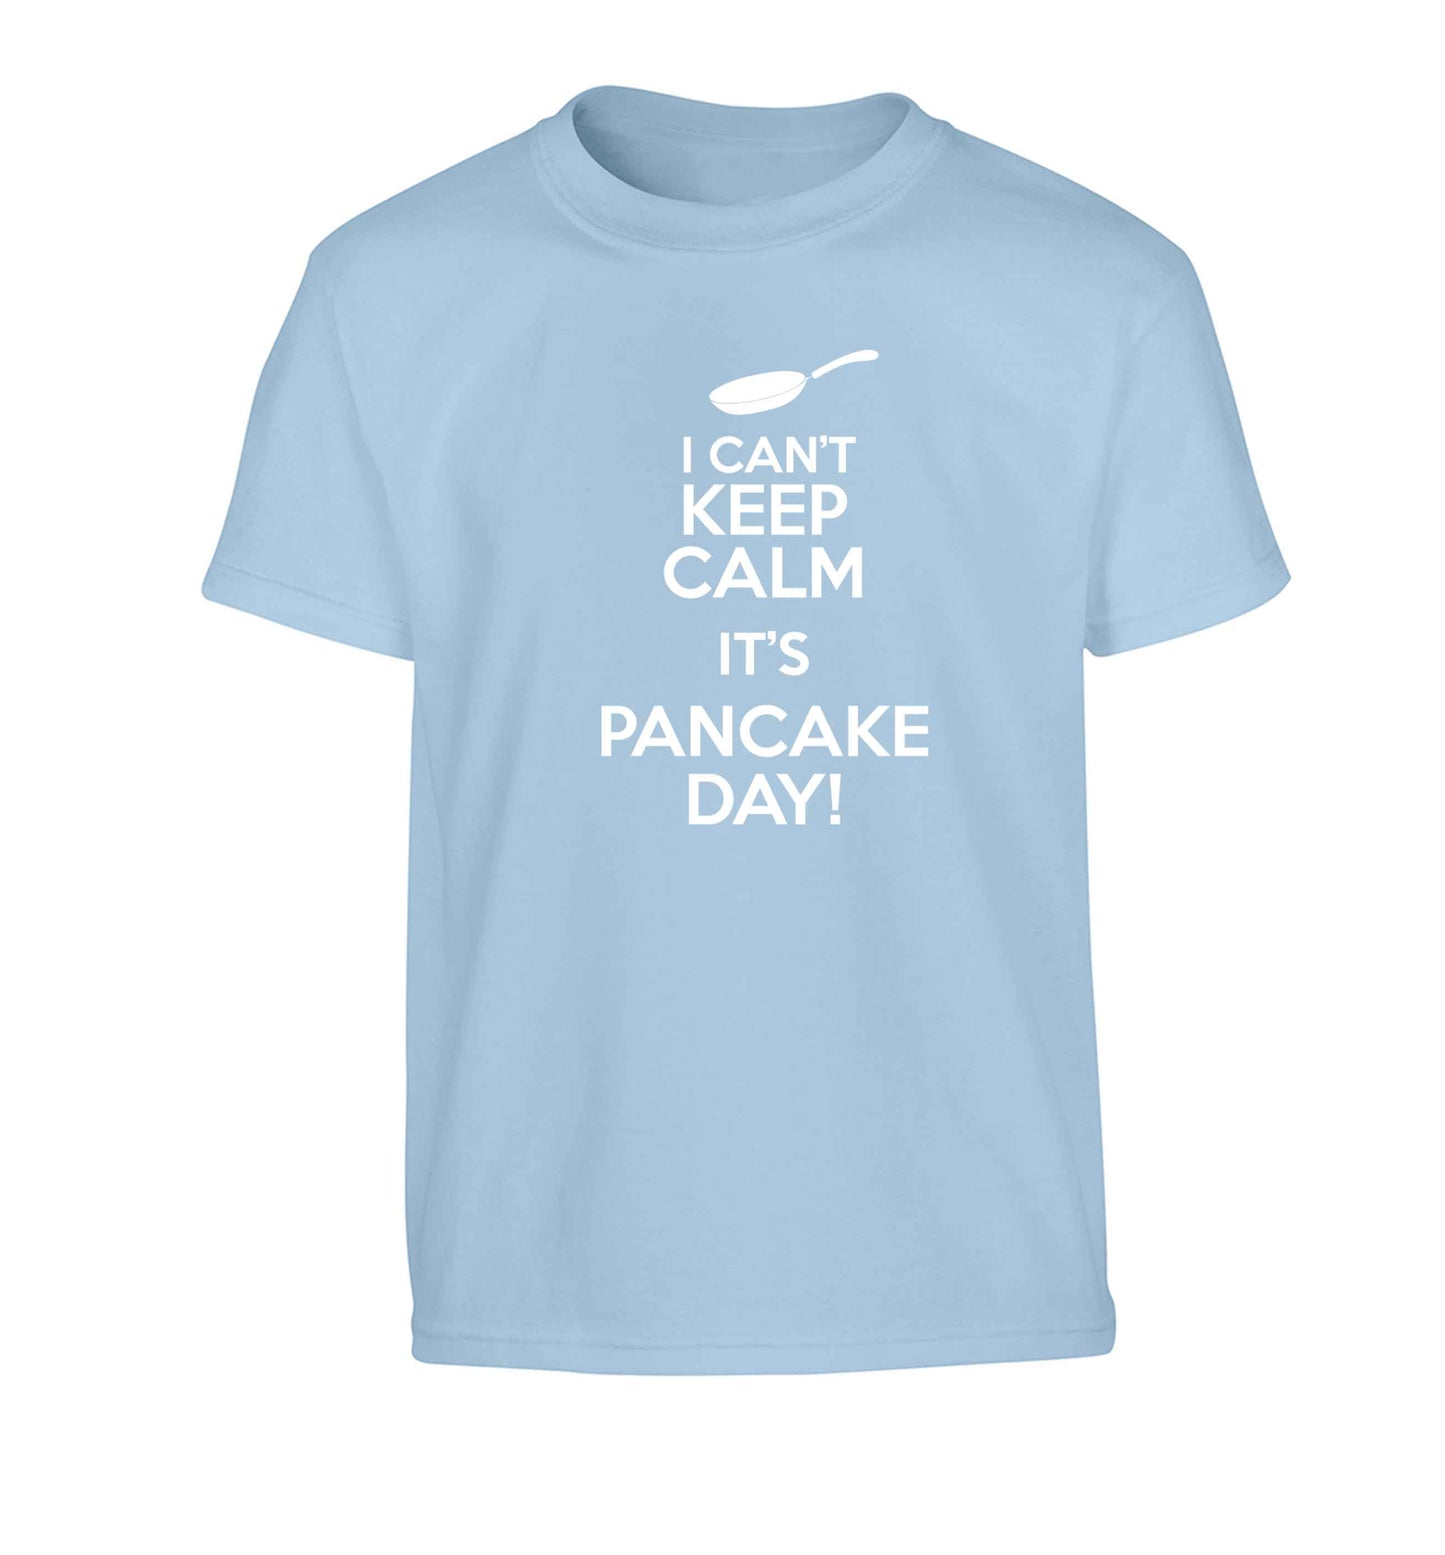 I can't keep calm it's pancake day! Children's light blue Tshirt 12-13 Years